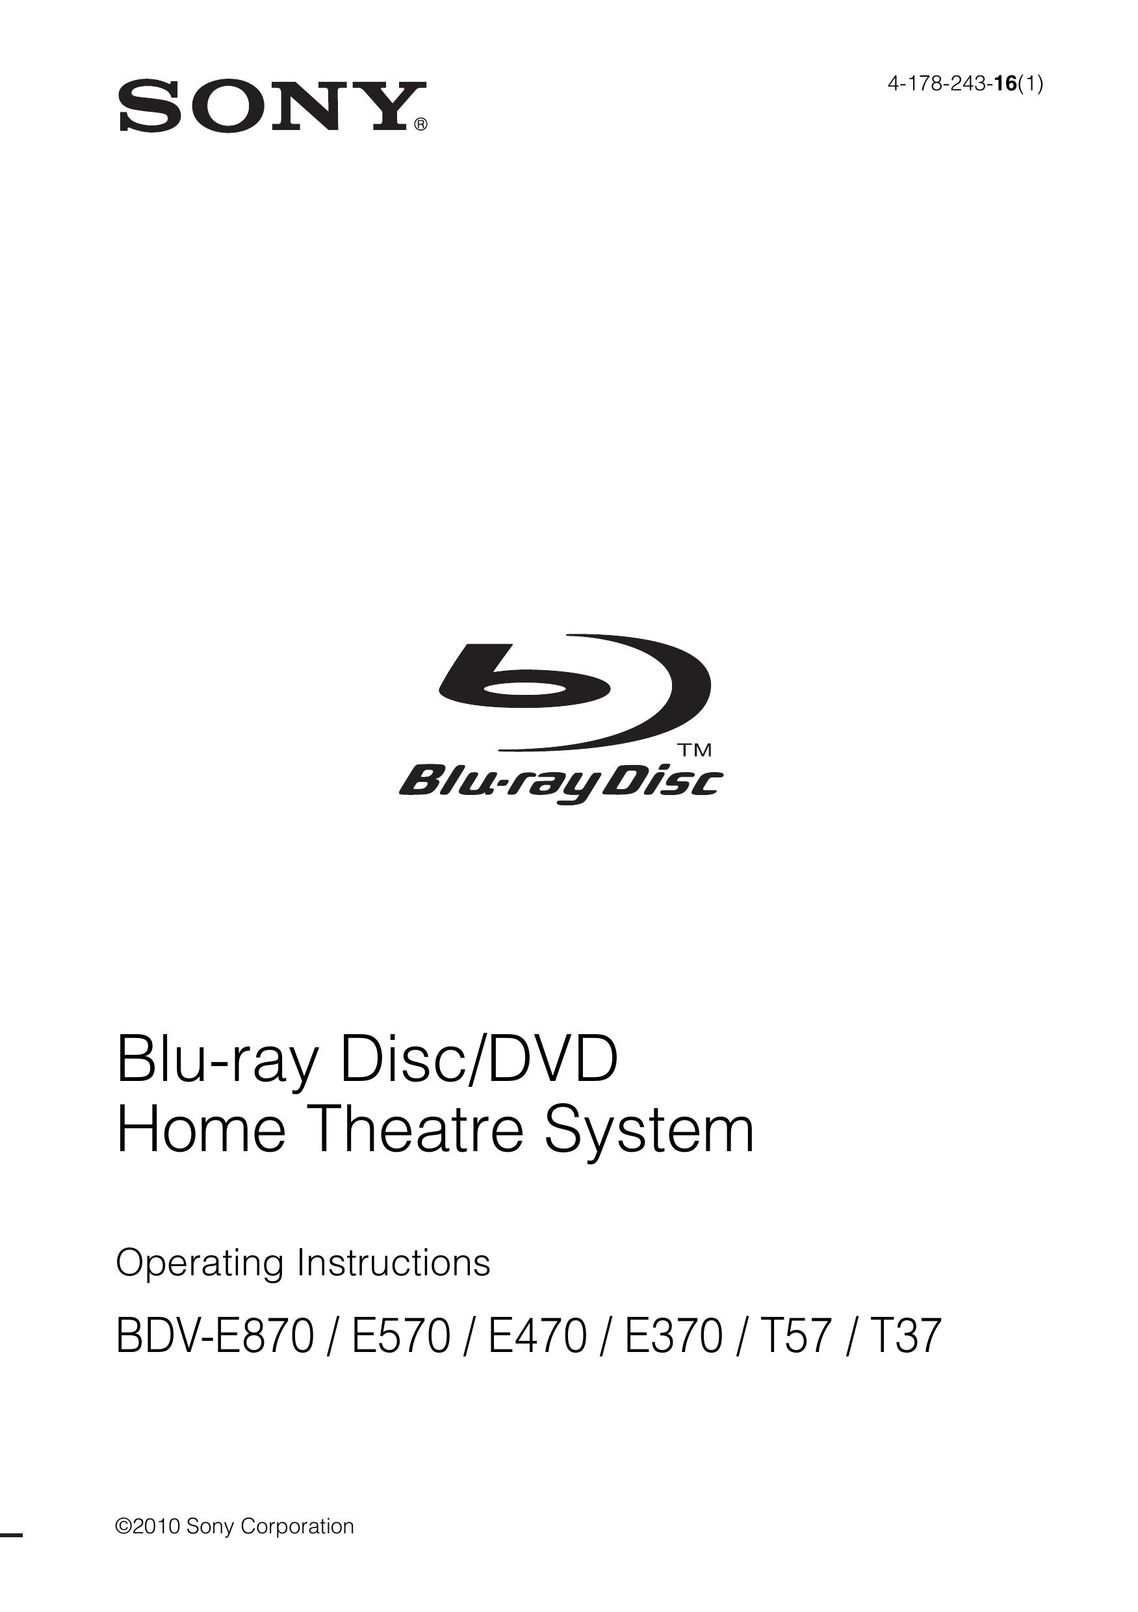 Sony BDV-E370 Home Theater System User Manual